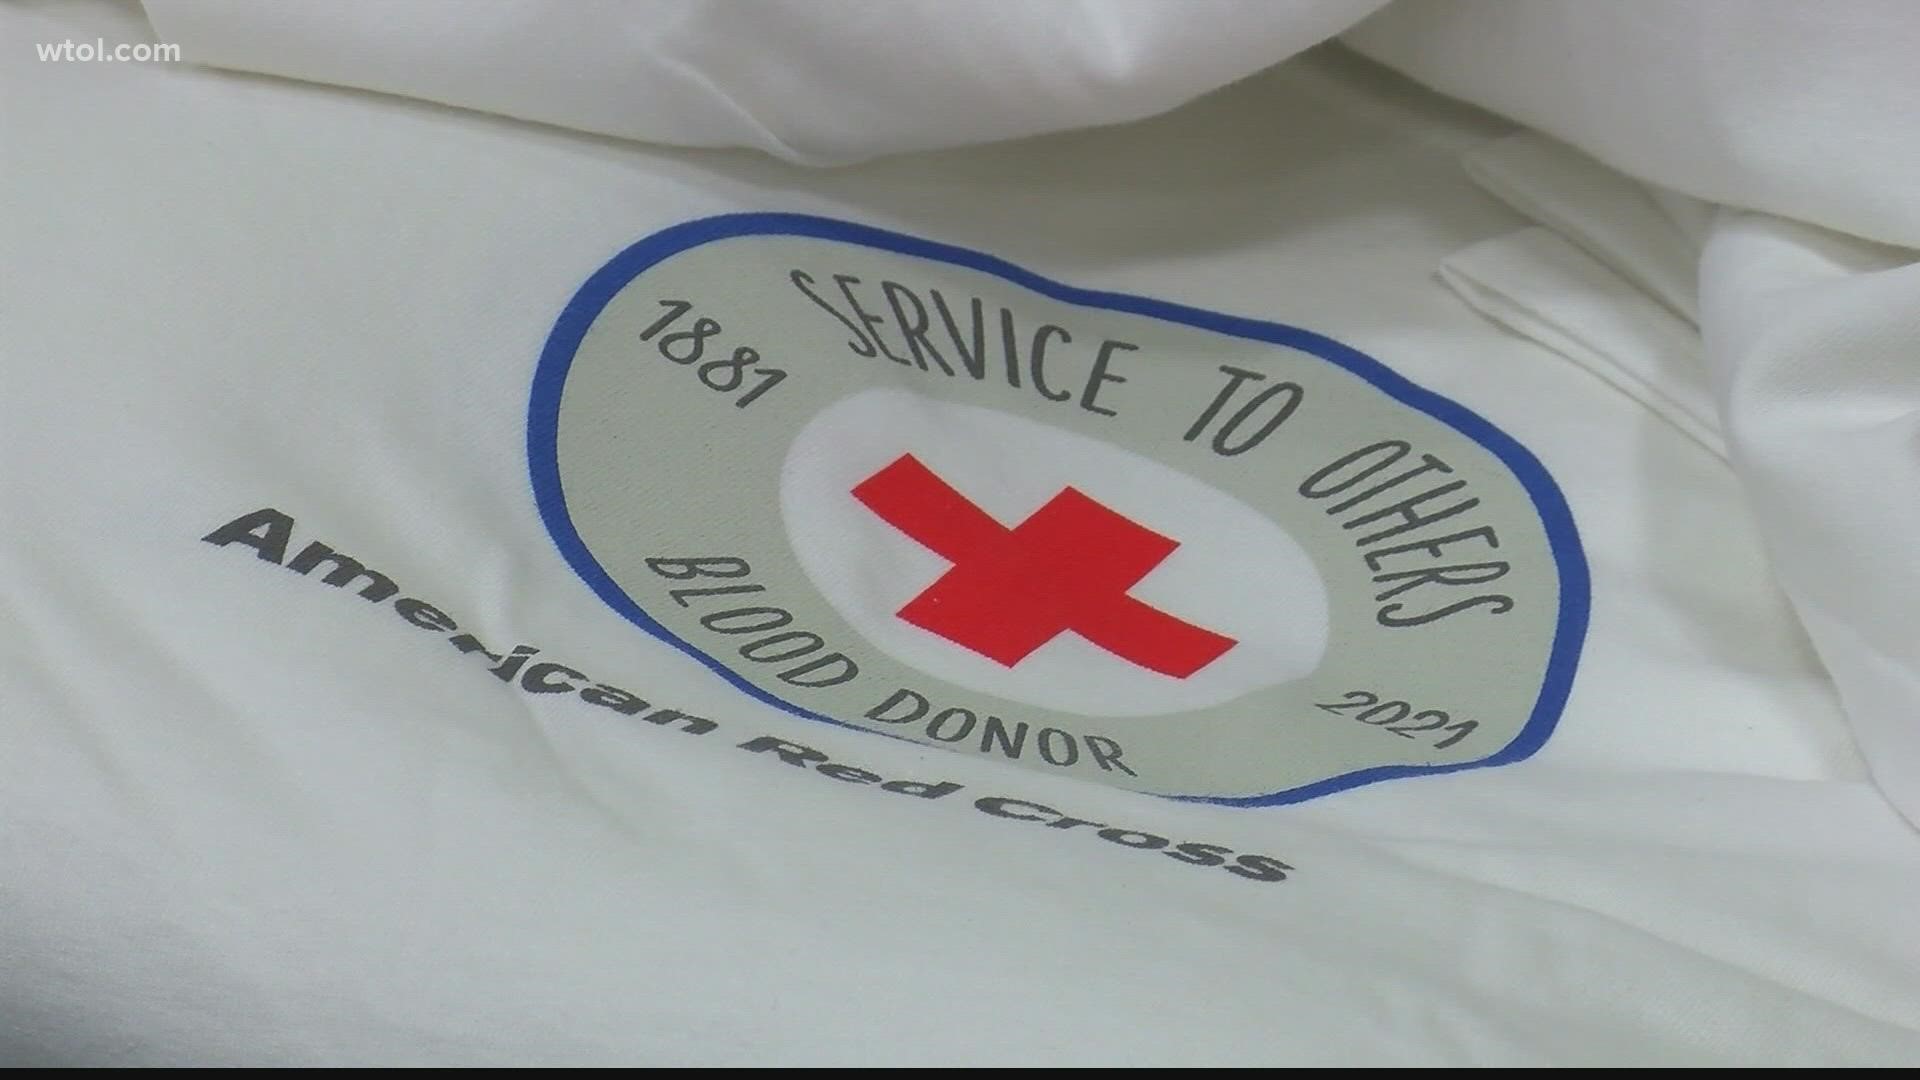 The American Red Cross says blood supply is the lowest in more than a decade. Making a donation takes about an hour of your time and comes with incentives for donors